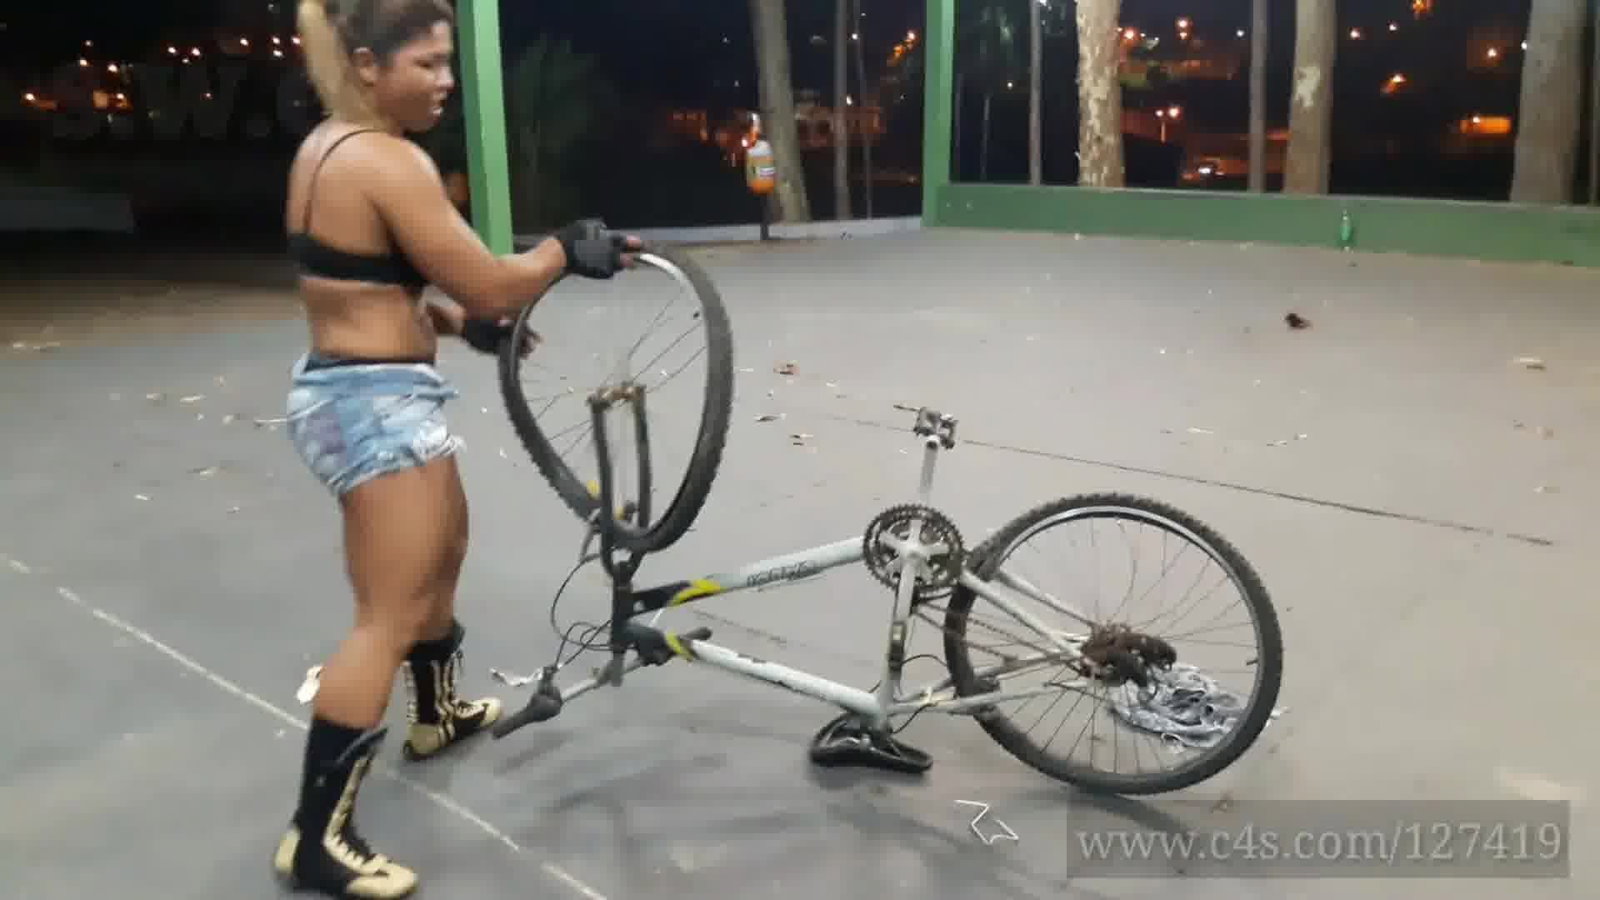 Photo by MusclegirlStrength with the username @MusclegirlStrength, who is a brand user,  February 9, 2024 at 1:00 PM and the text says 'Muscle Goddess Rogatona Obliterates Bike in Jaw-Dropping Display!
Full Video: https://bit.ly/3dDLLx9

Step into the world of muscle goddesses and witness their jaw-dropping strength as they crush, flex, and dominate - embrace your desire for power at..'